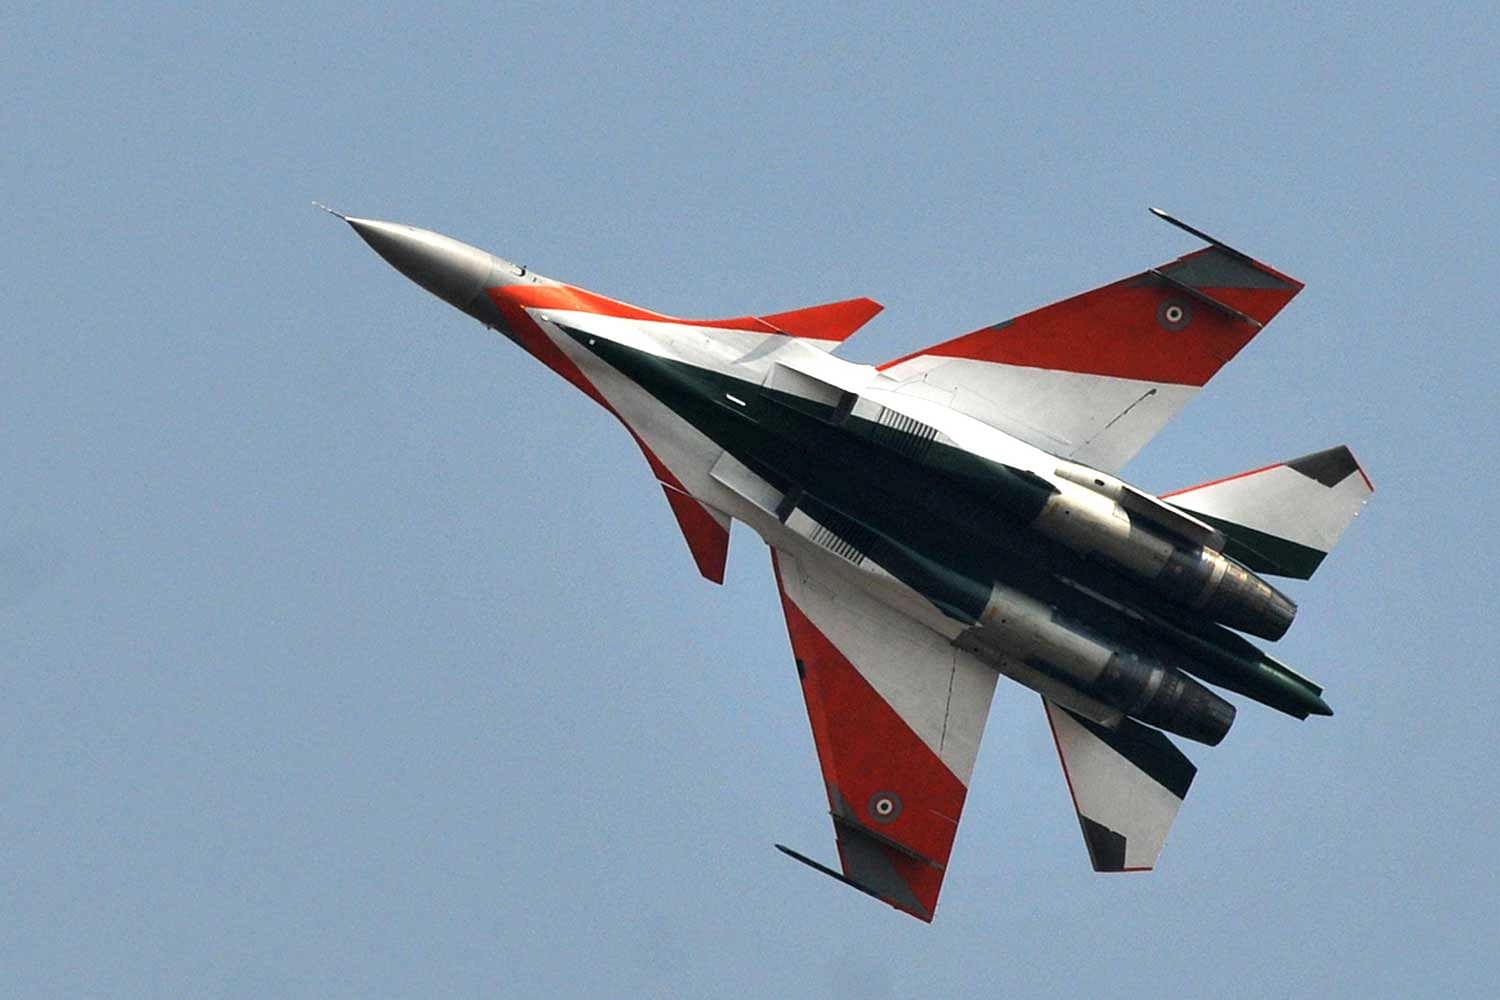 The enhancement of the Su-30 MKI fleet would include the installation of new radars with better capability and improved avionics. DH file photo